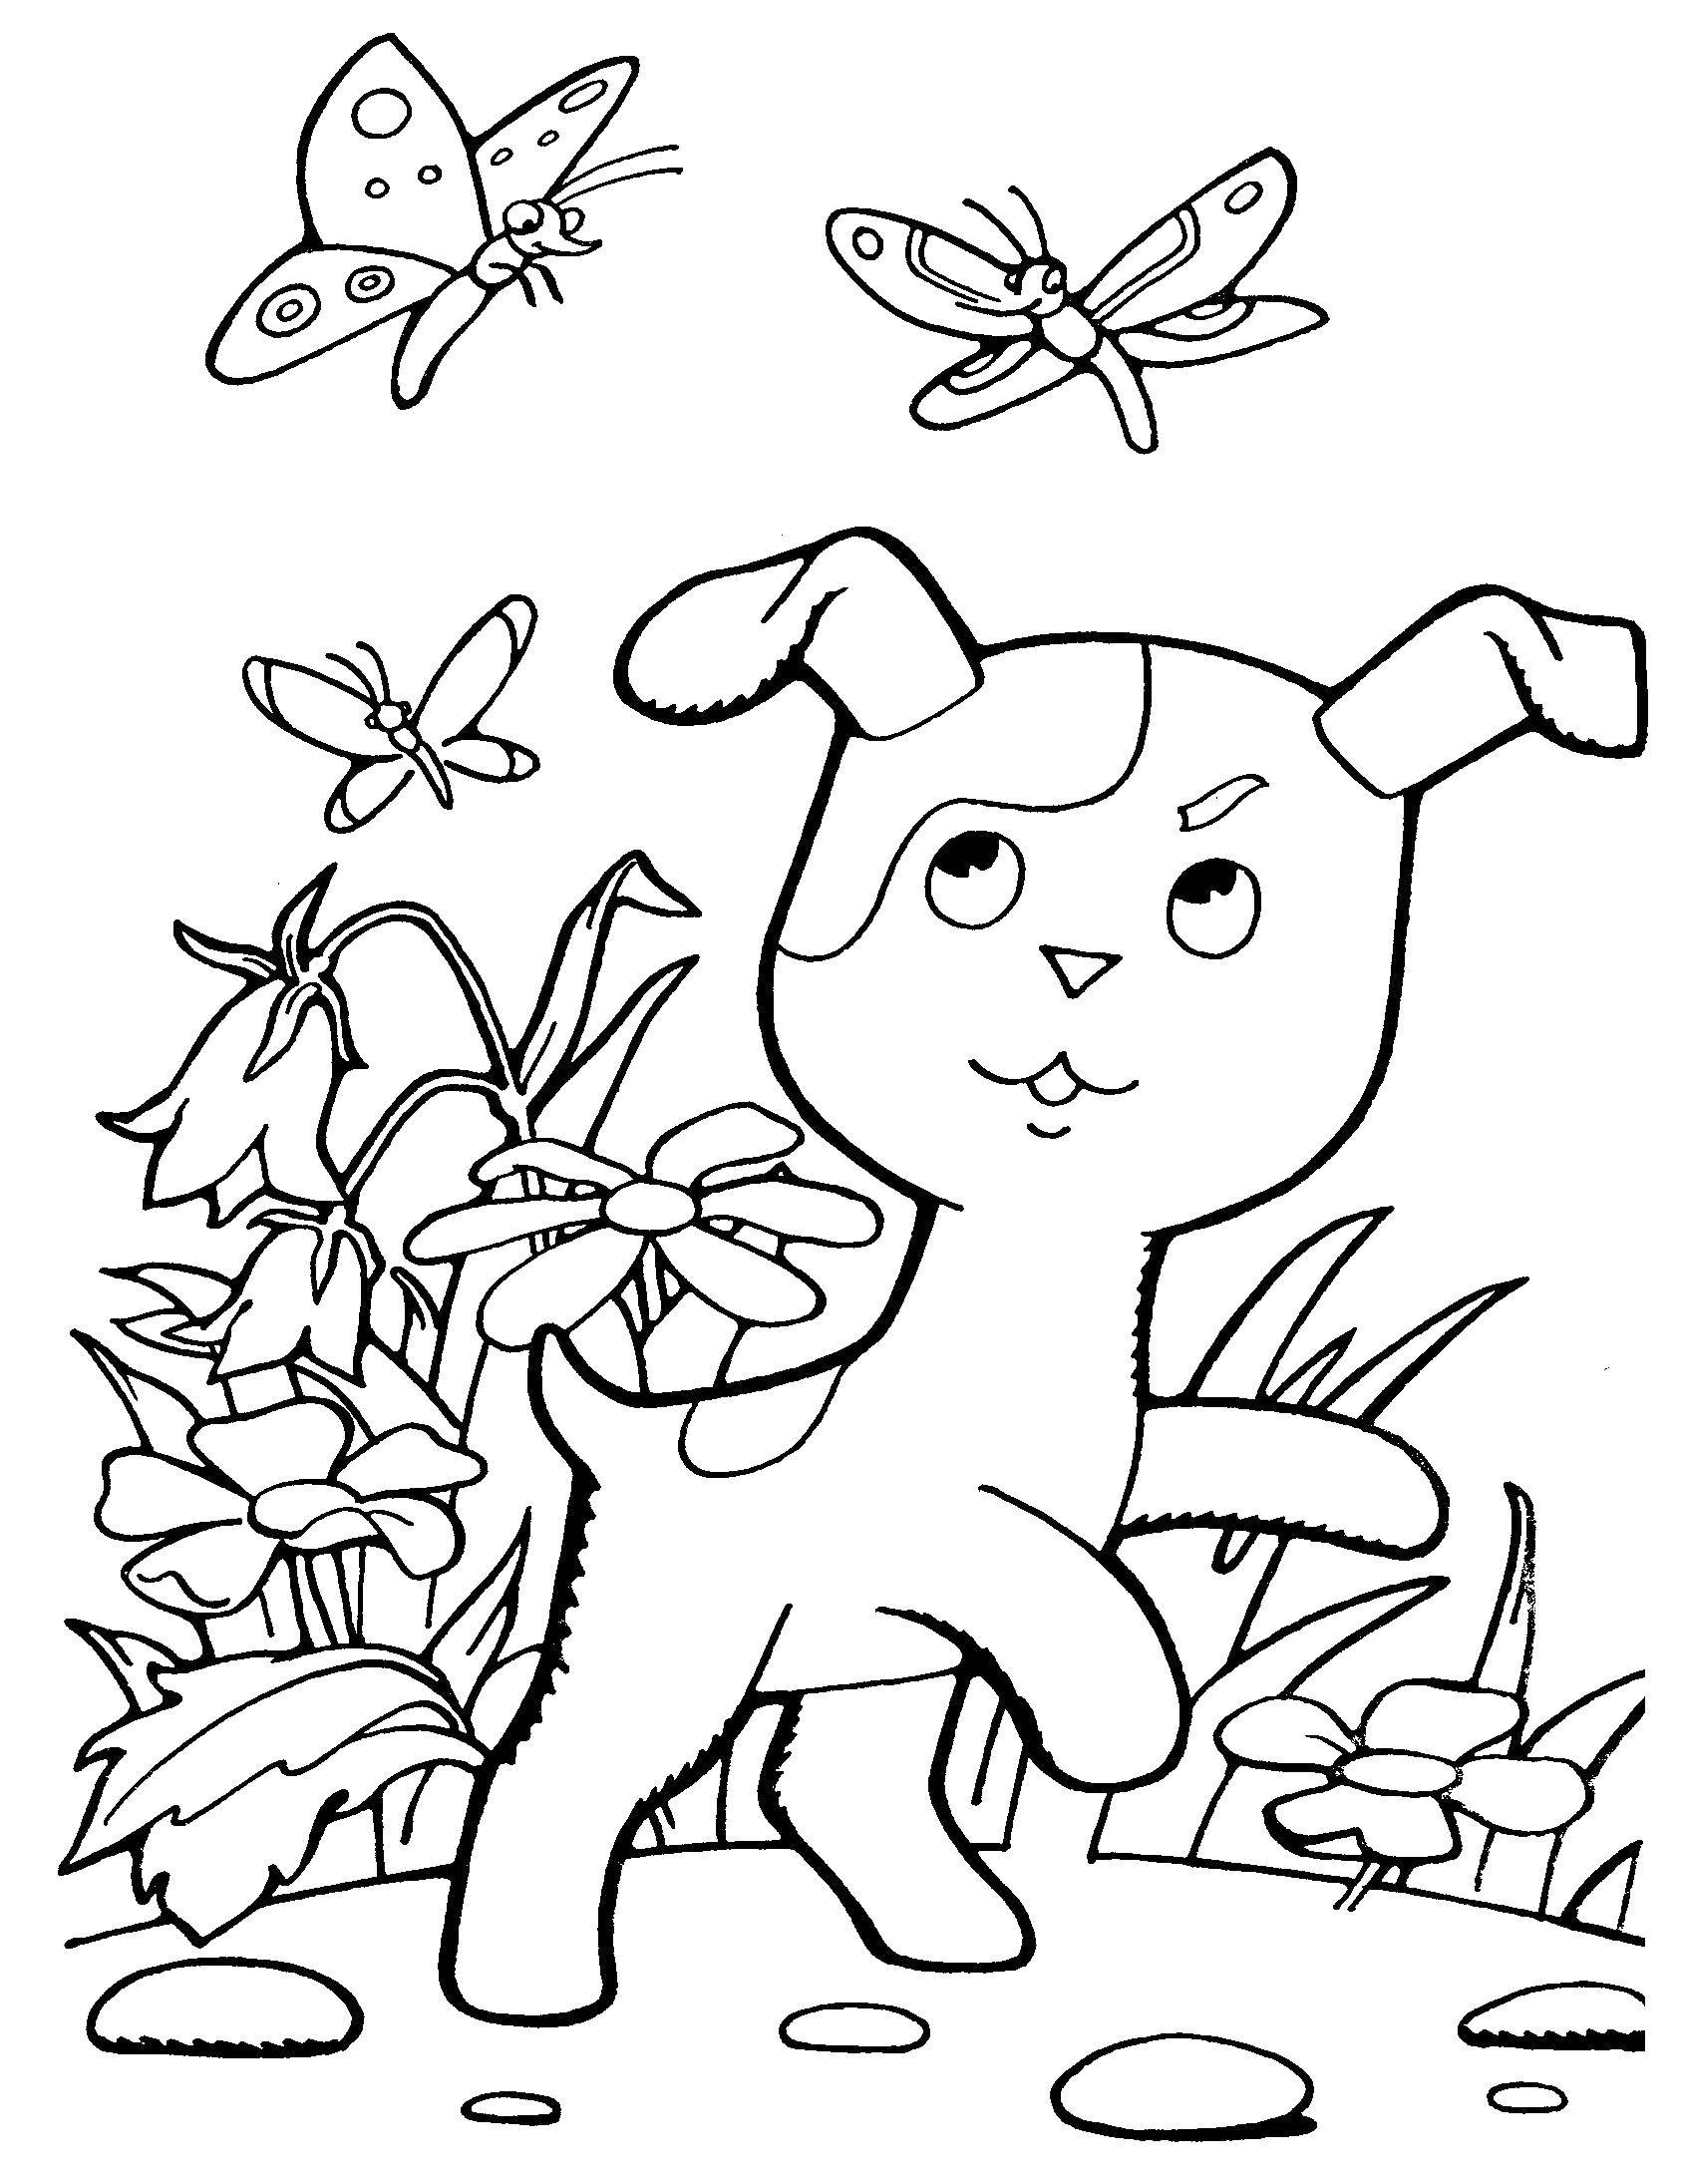 Coloring Ball and butterfly. Category kitten Gav. Tags:  Cartoon character, kitten named woof .